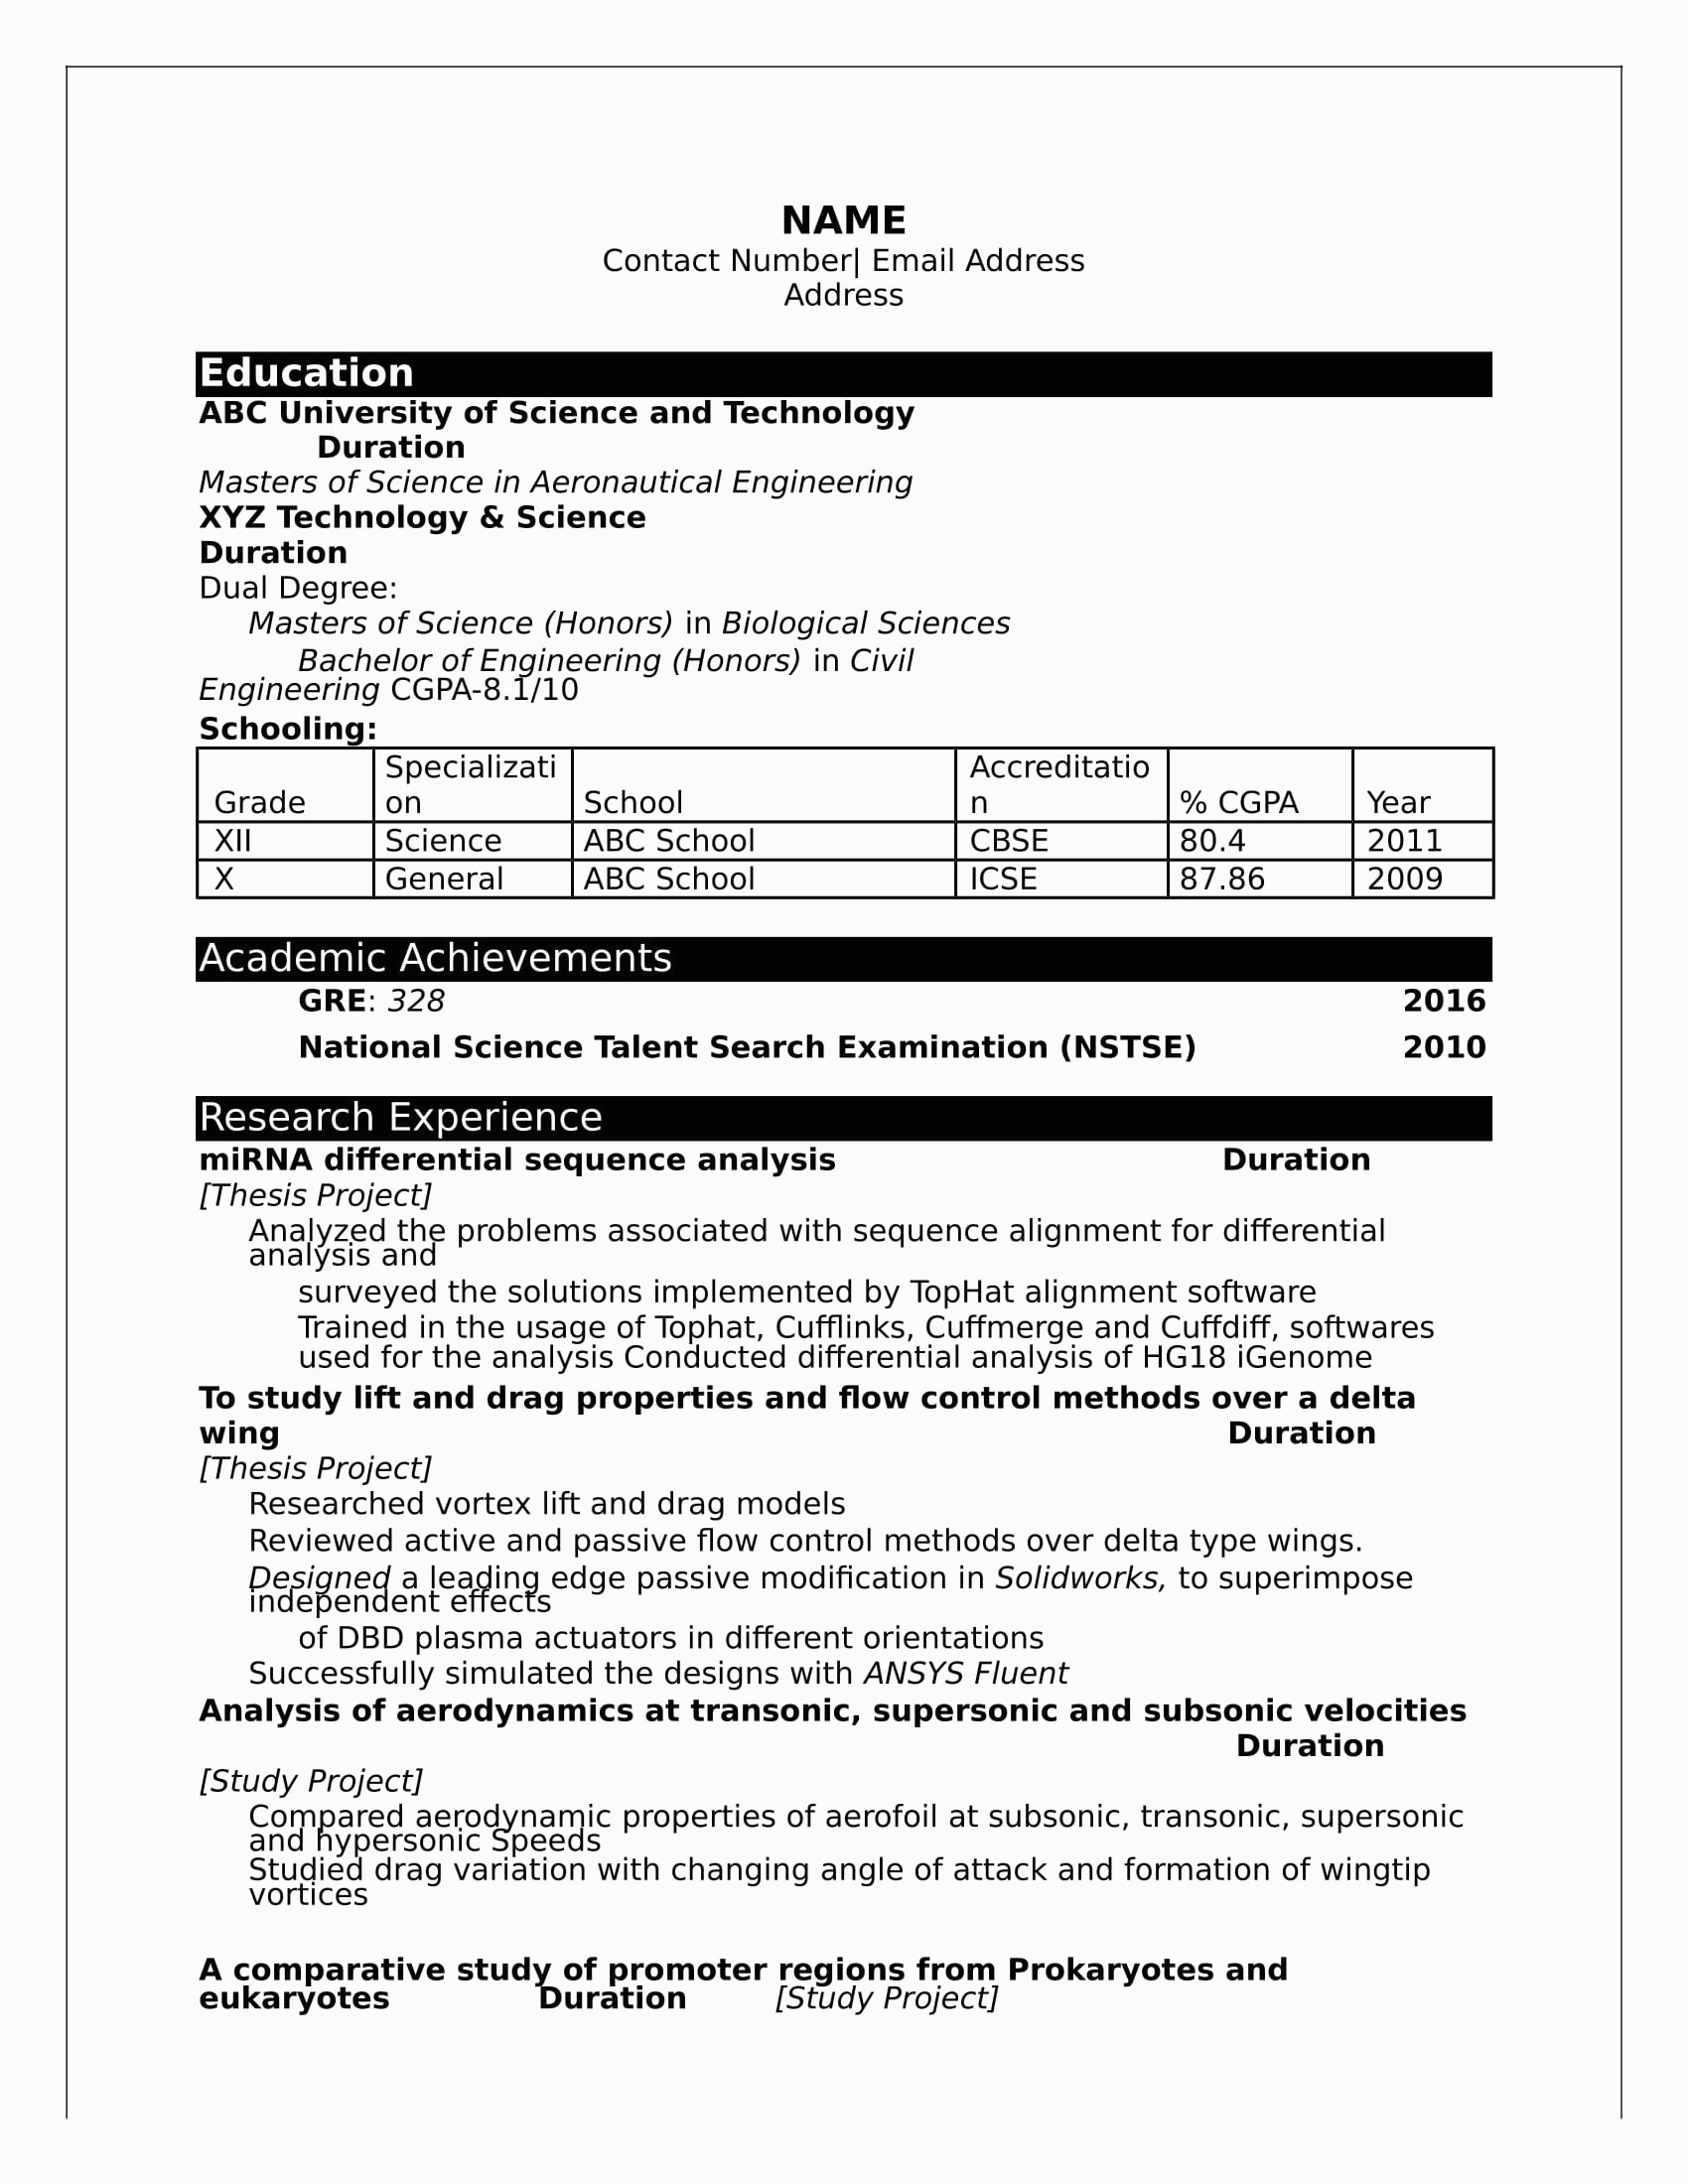 Free Resume Template Download for Freshers Resume formats for 2020